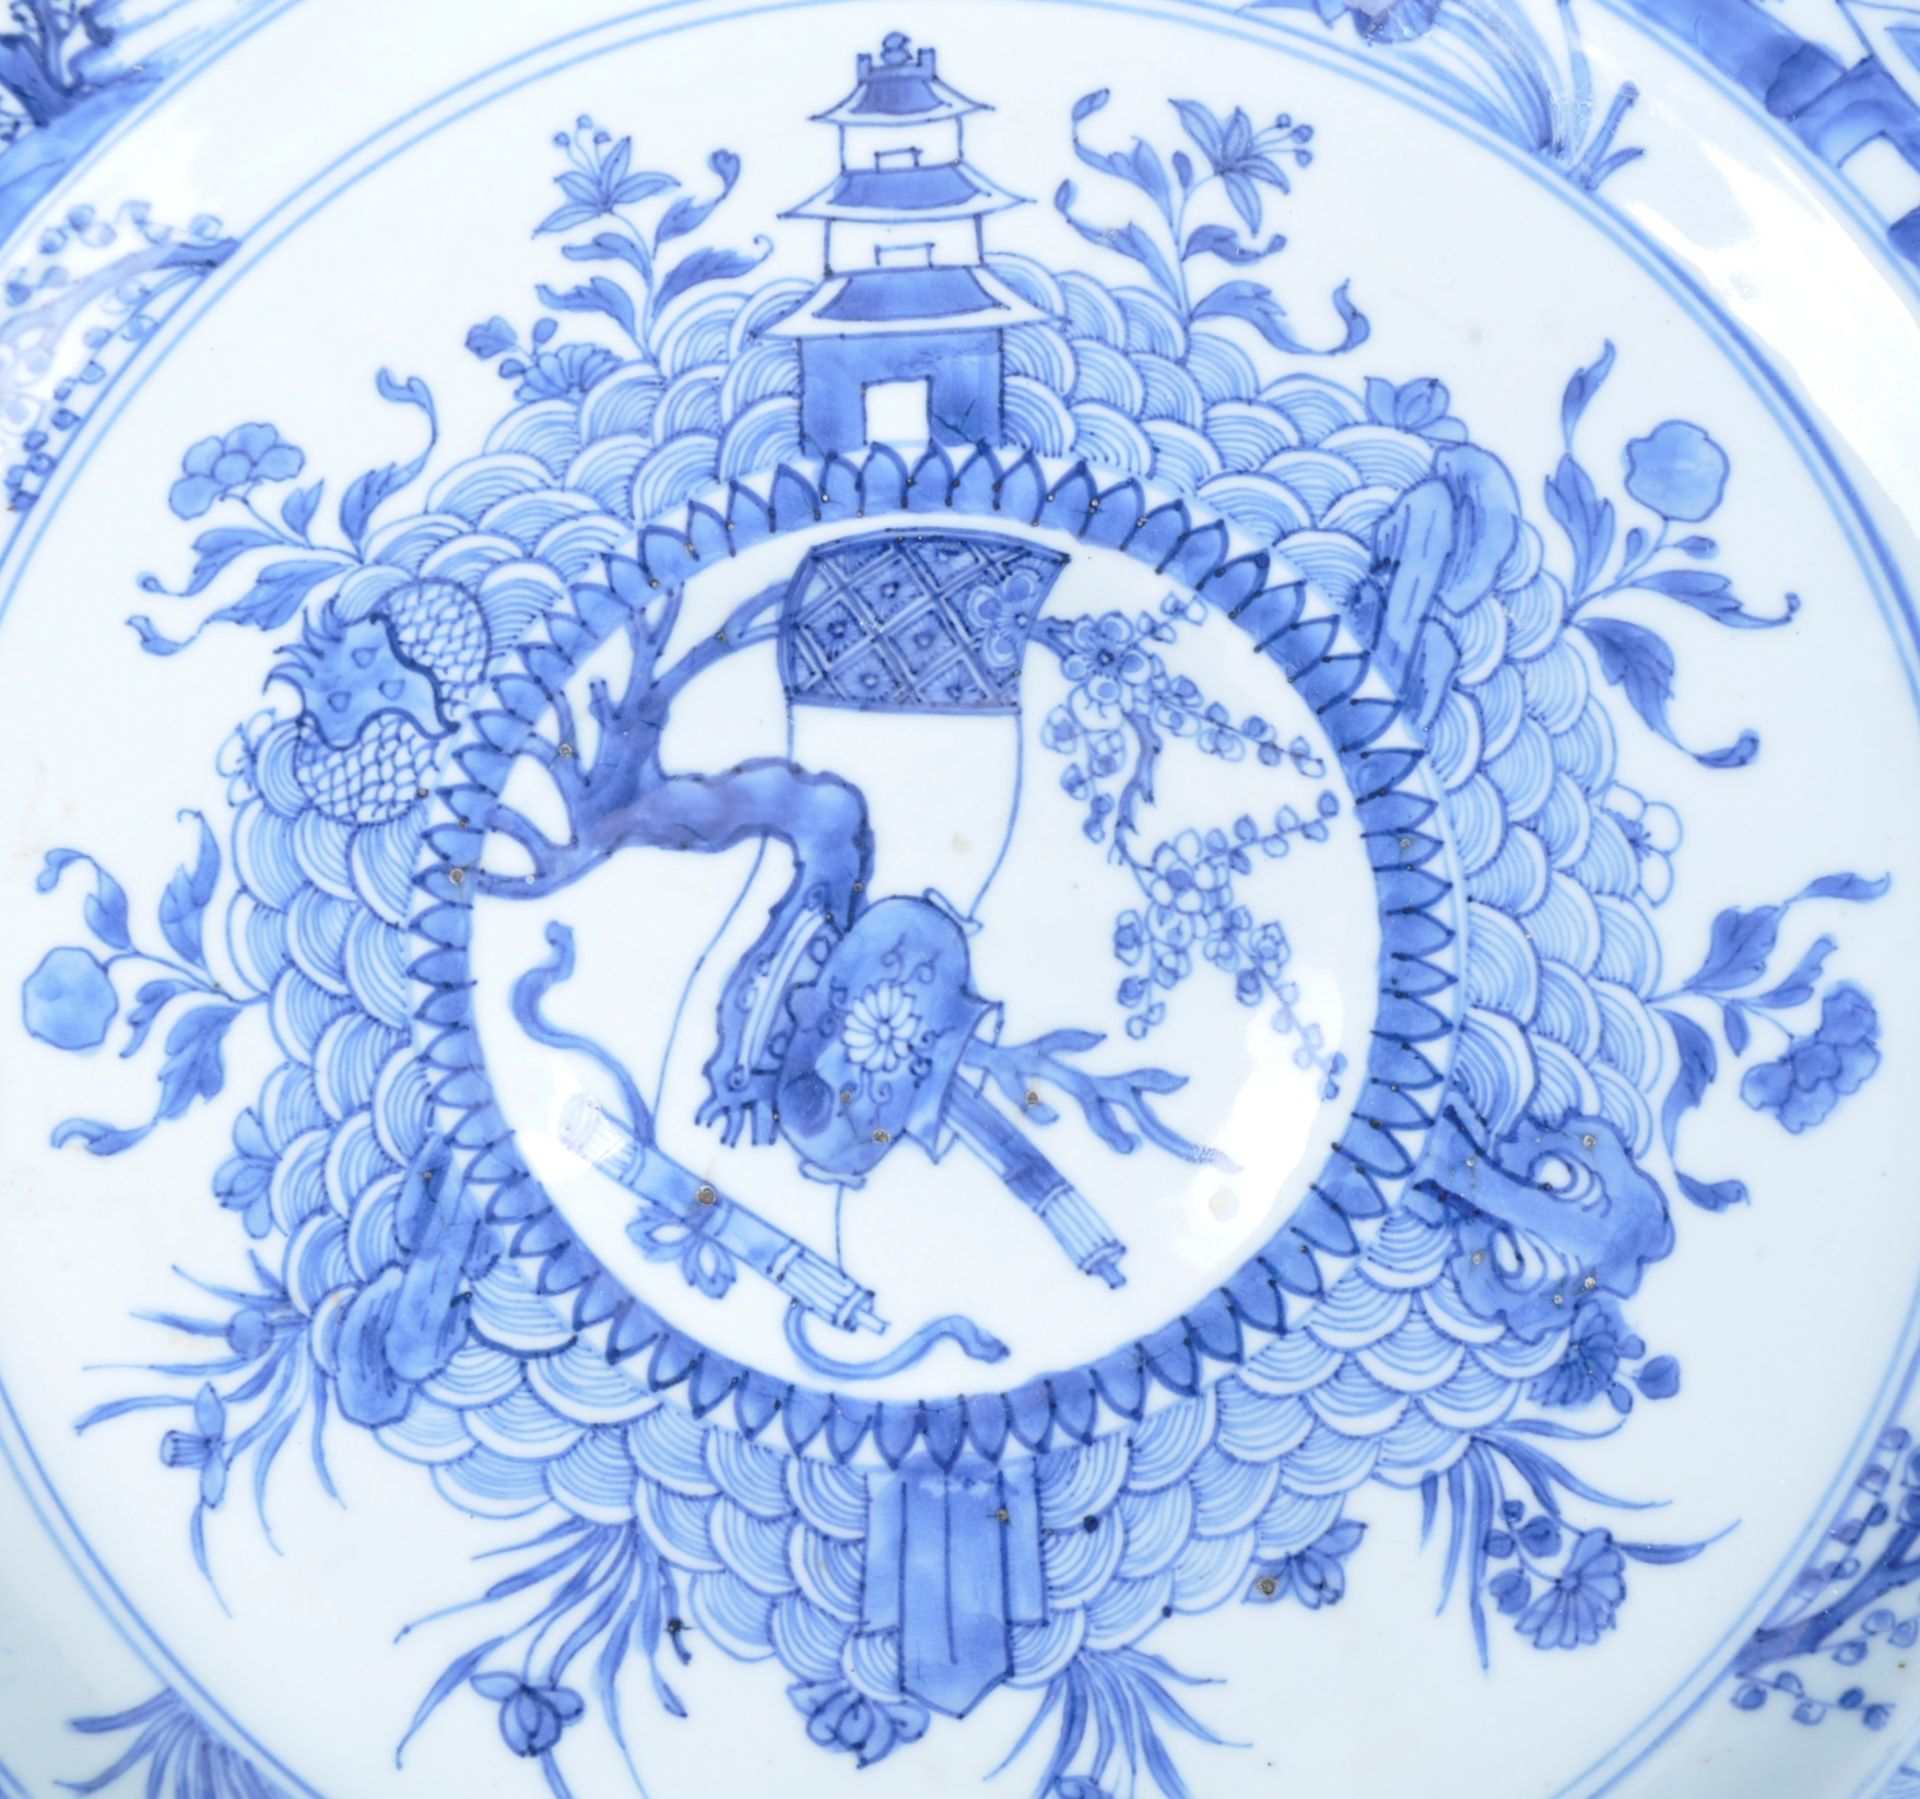 LARGE 19TH CENTURY CHINESE BLUE & WHITE PORCELAIN CHARGER - Image 2 of 6